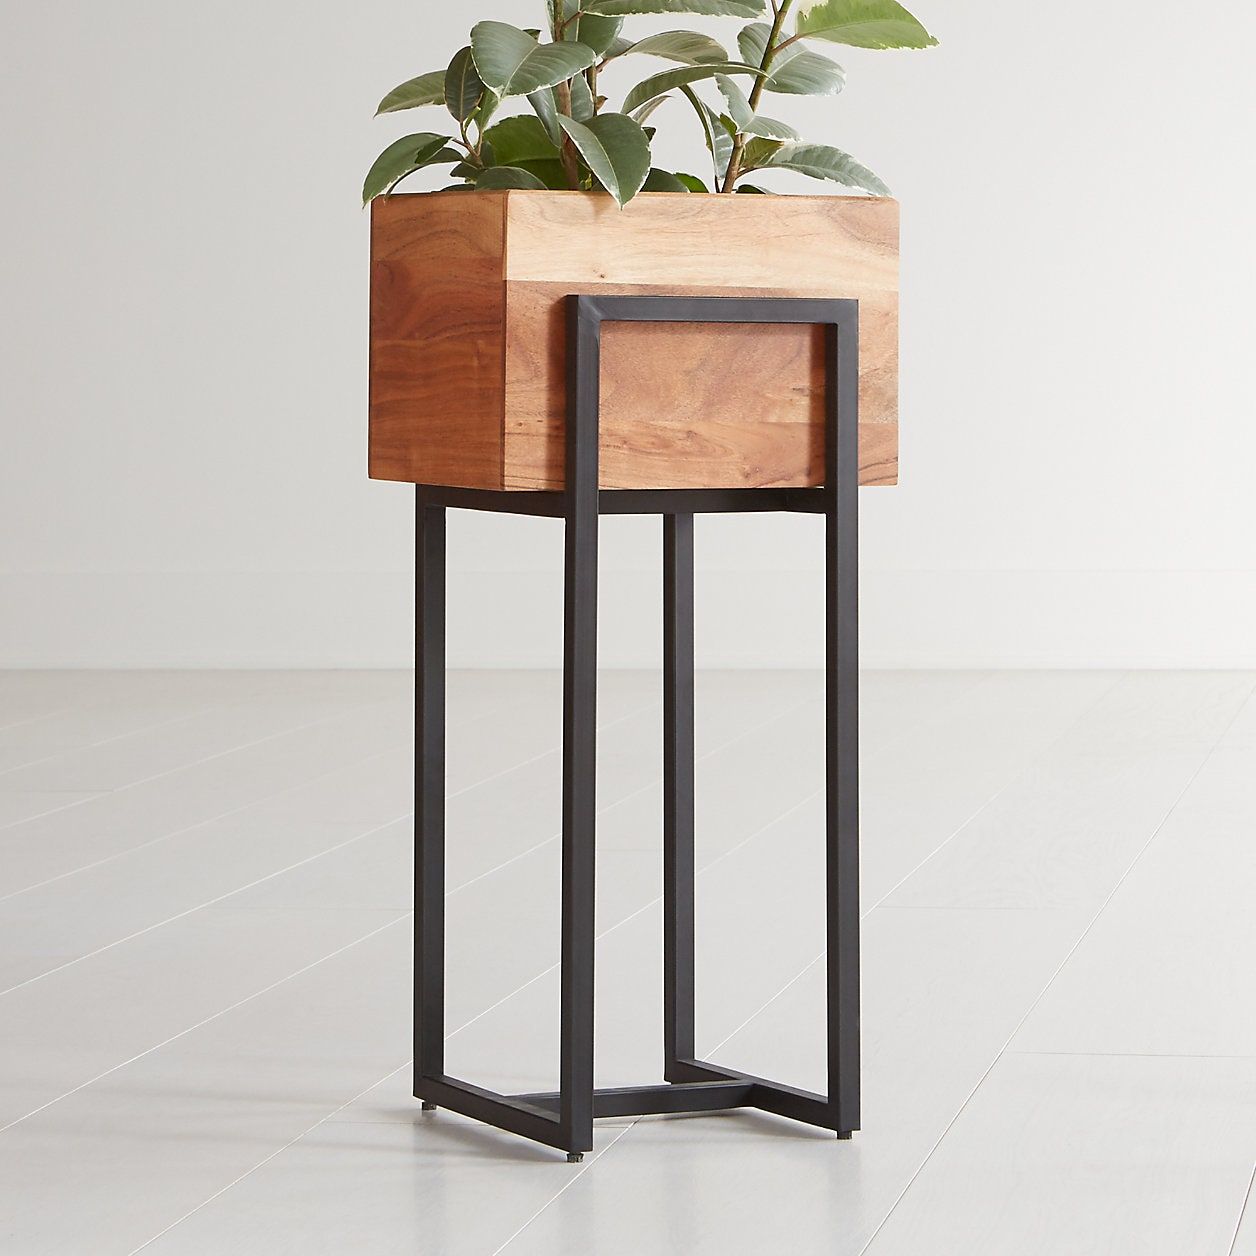 15 Best Indoor Plant Stands That Seriously Stand Out | Architectural Digest For Medium Plant Stands (View 14 of 15)